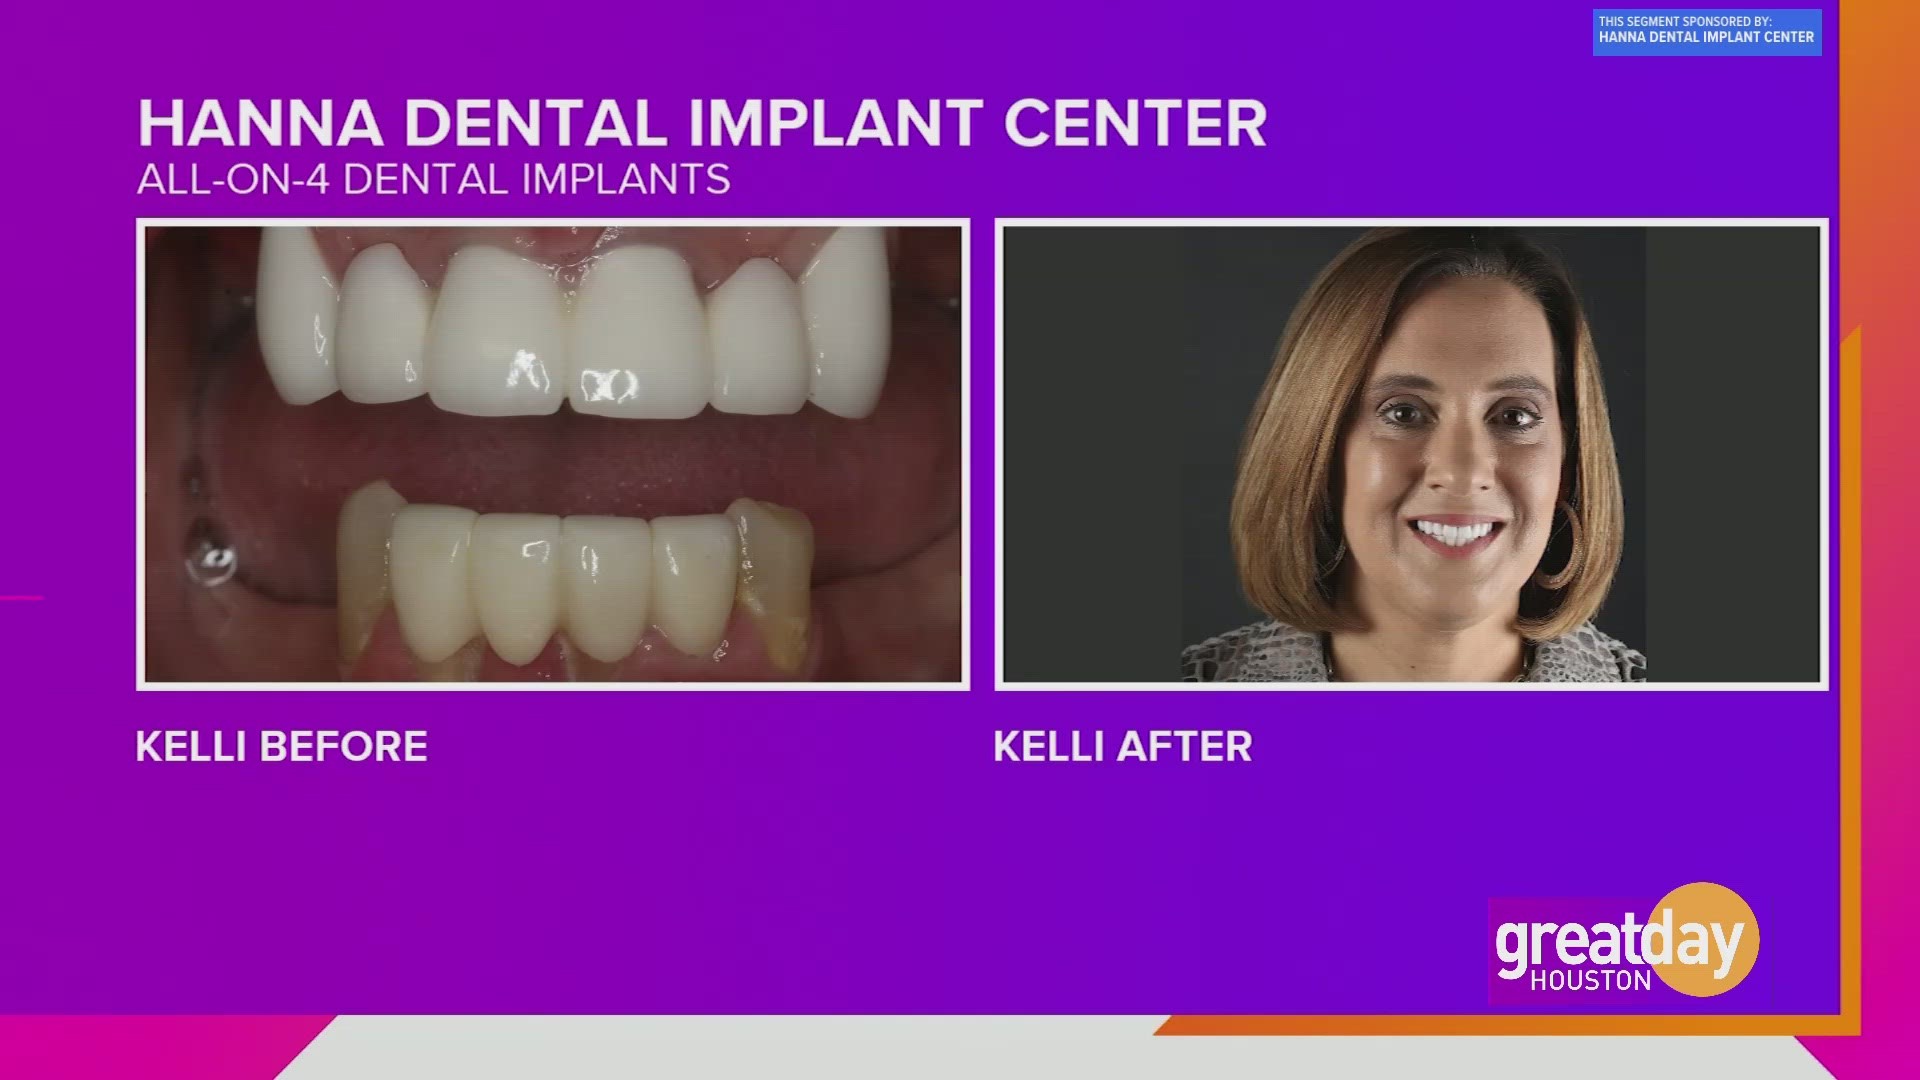 Dr. Raouf Hanna changed the life of Kelli Griffith after she endured 25 years of dental pain.